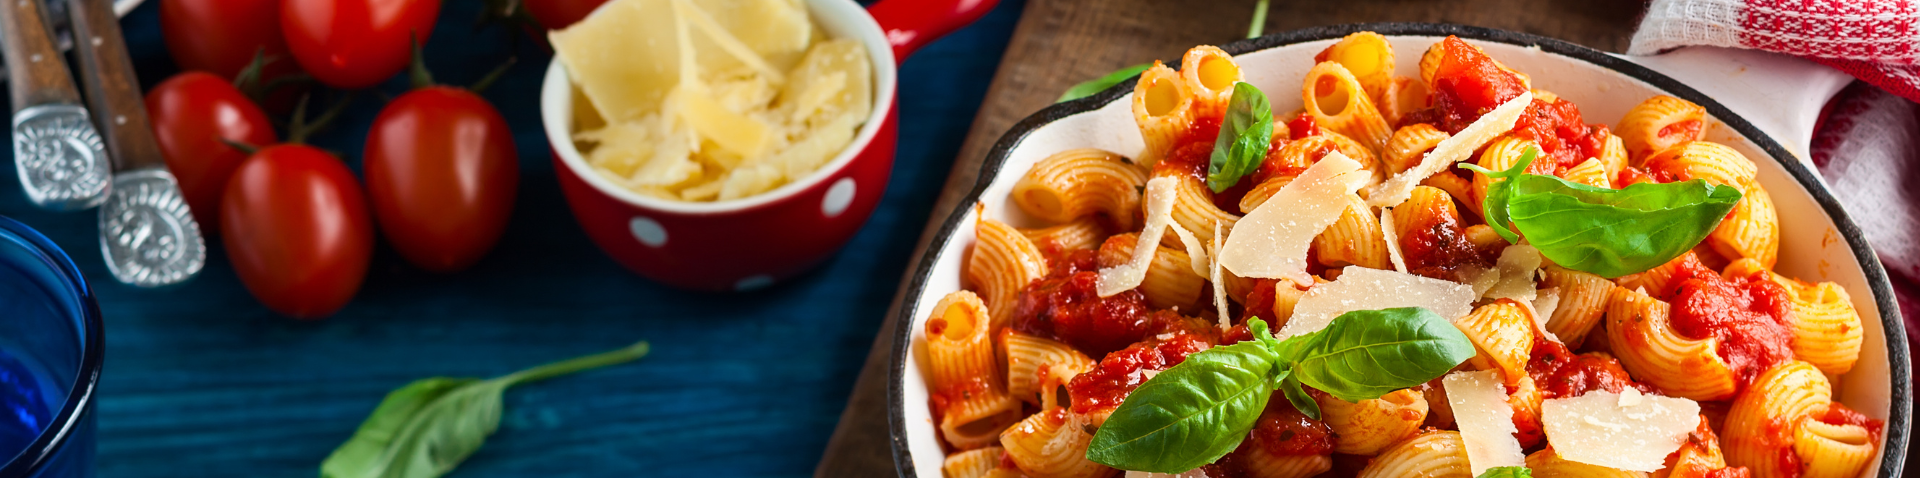 Close-up view of a bowl of pasta with a garnish